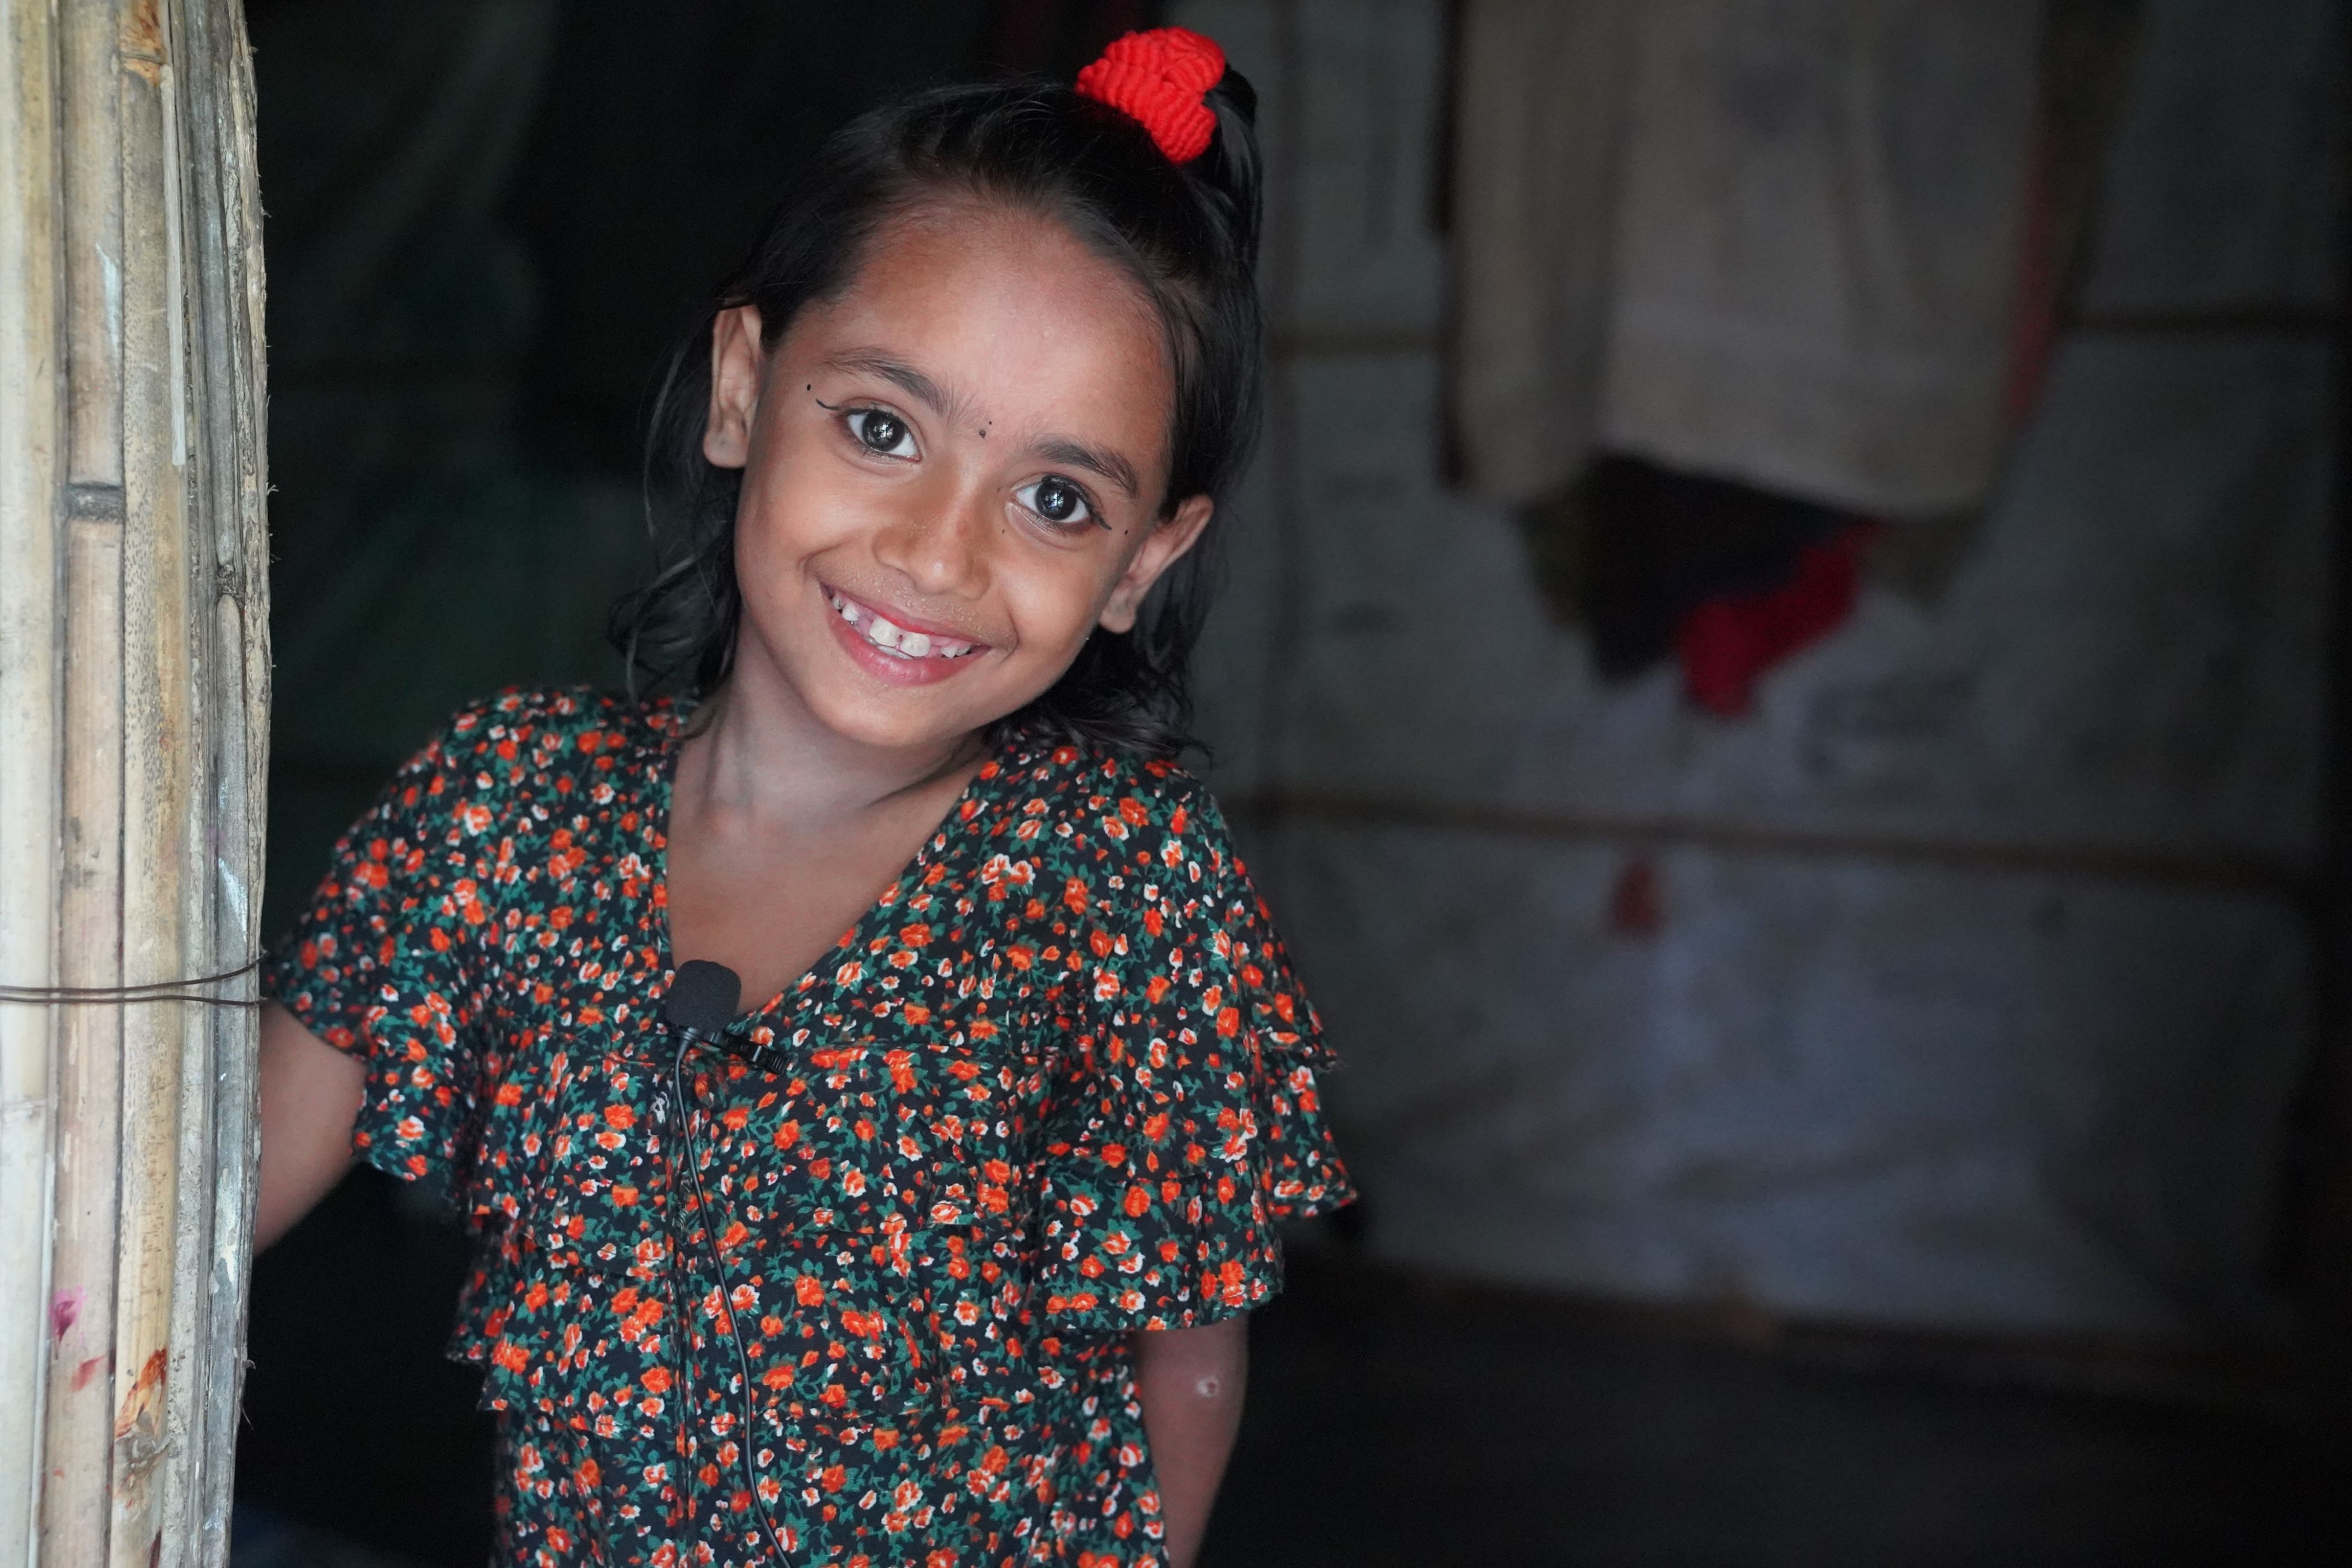 A portrait of Sultana*, 7, at her house in Cox's Bazar, Bangladesh